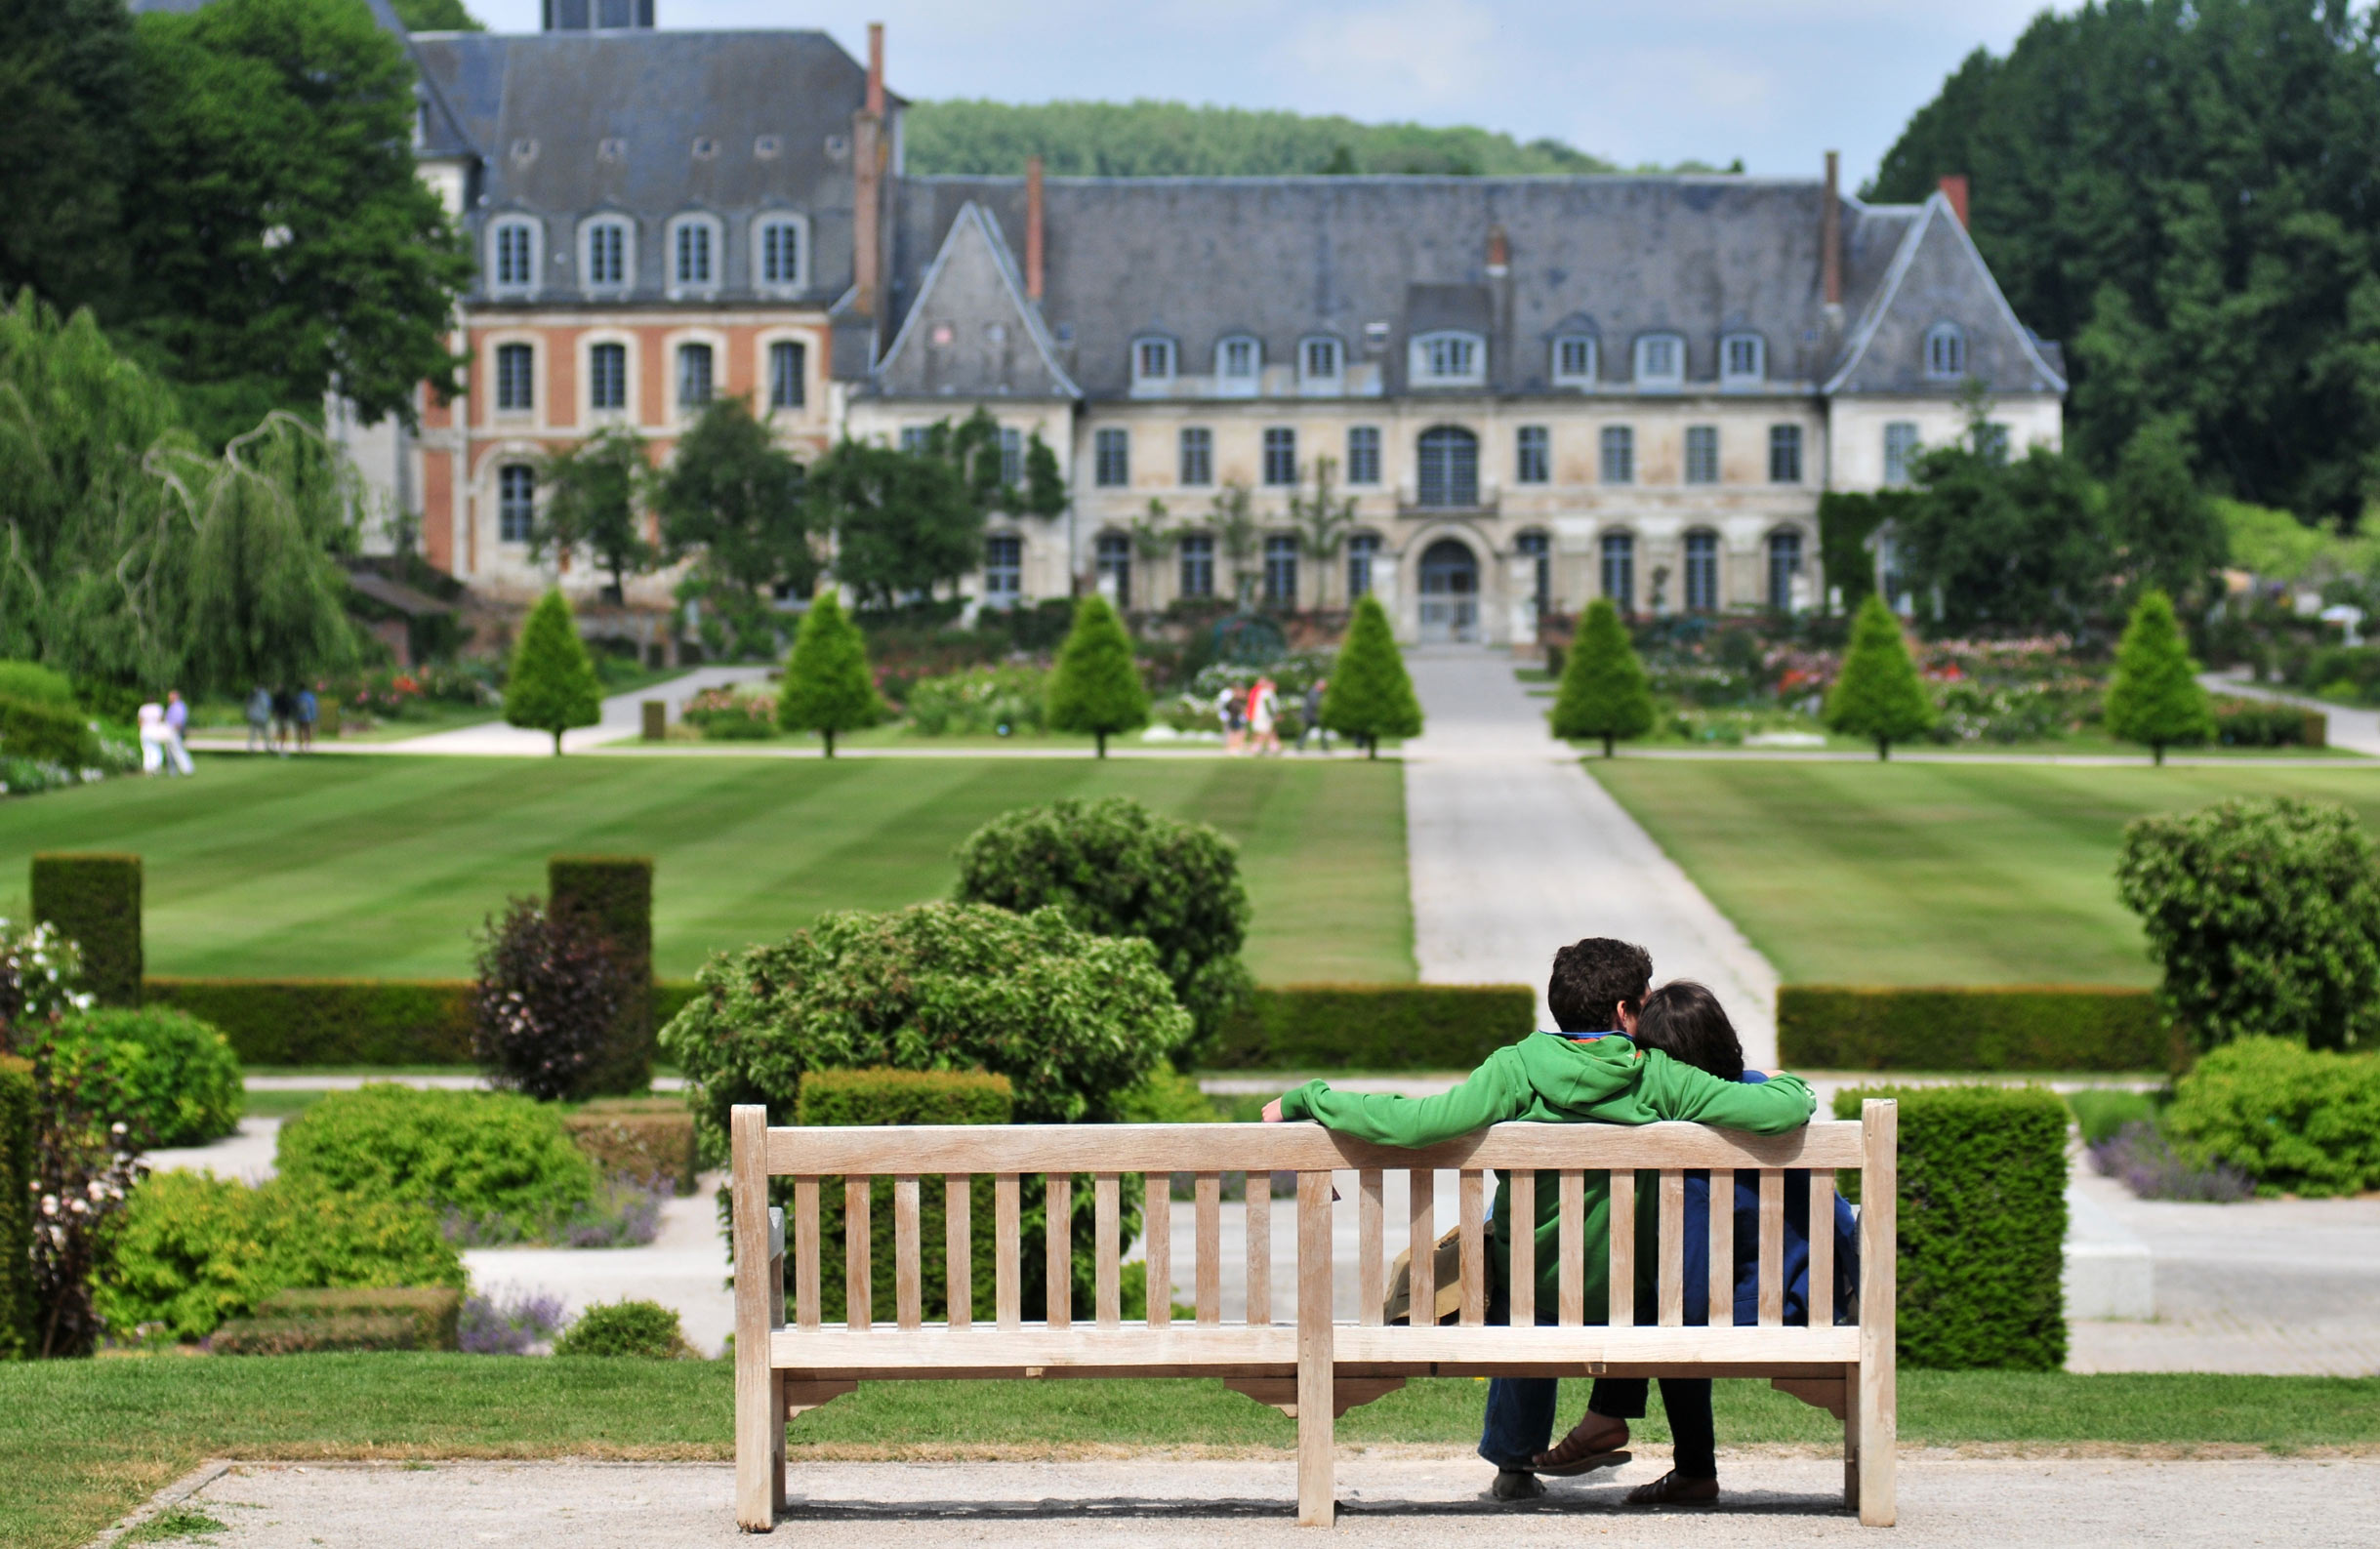 Abbaye-de-Valloires in Argoules, Northern France. Visit the abbey and gardens ‒ and stay for the night!